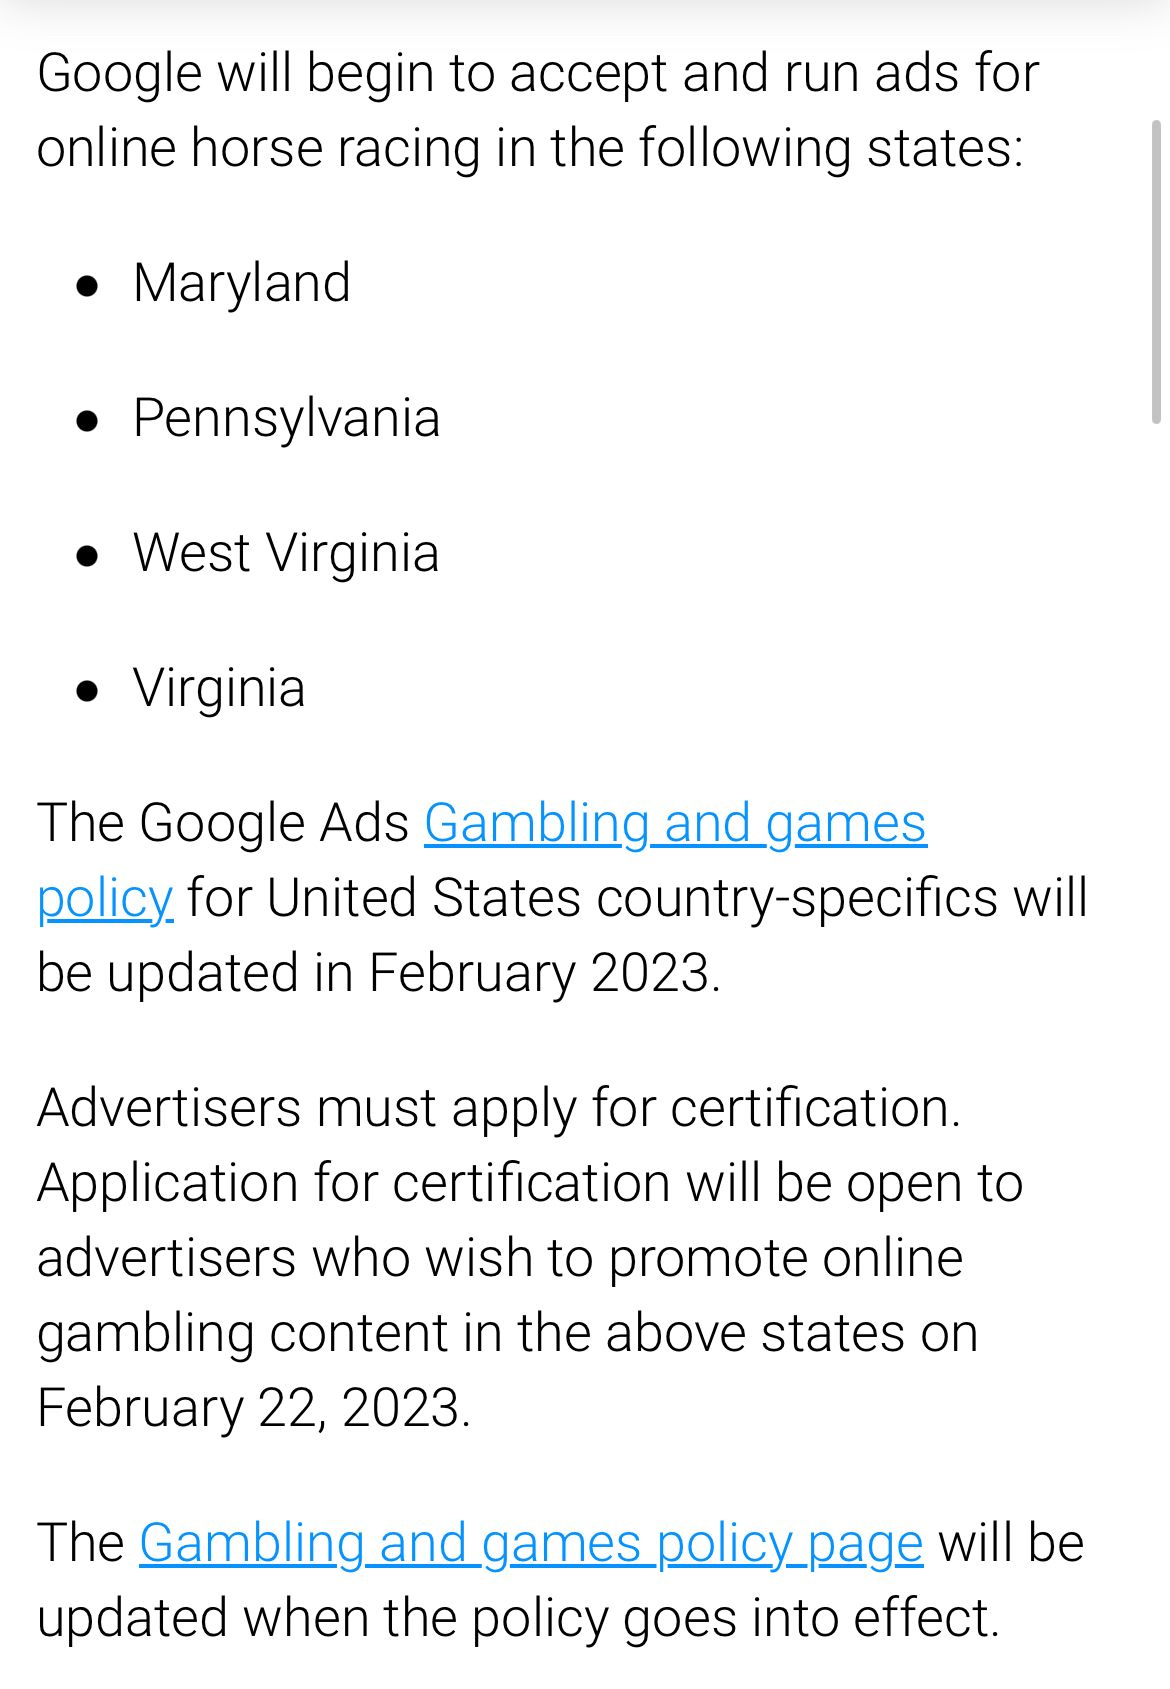 Google Ads new gambling and games policy